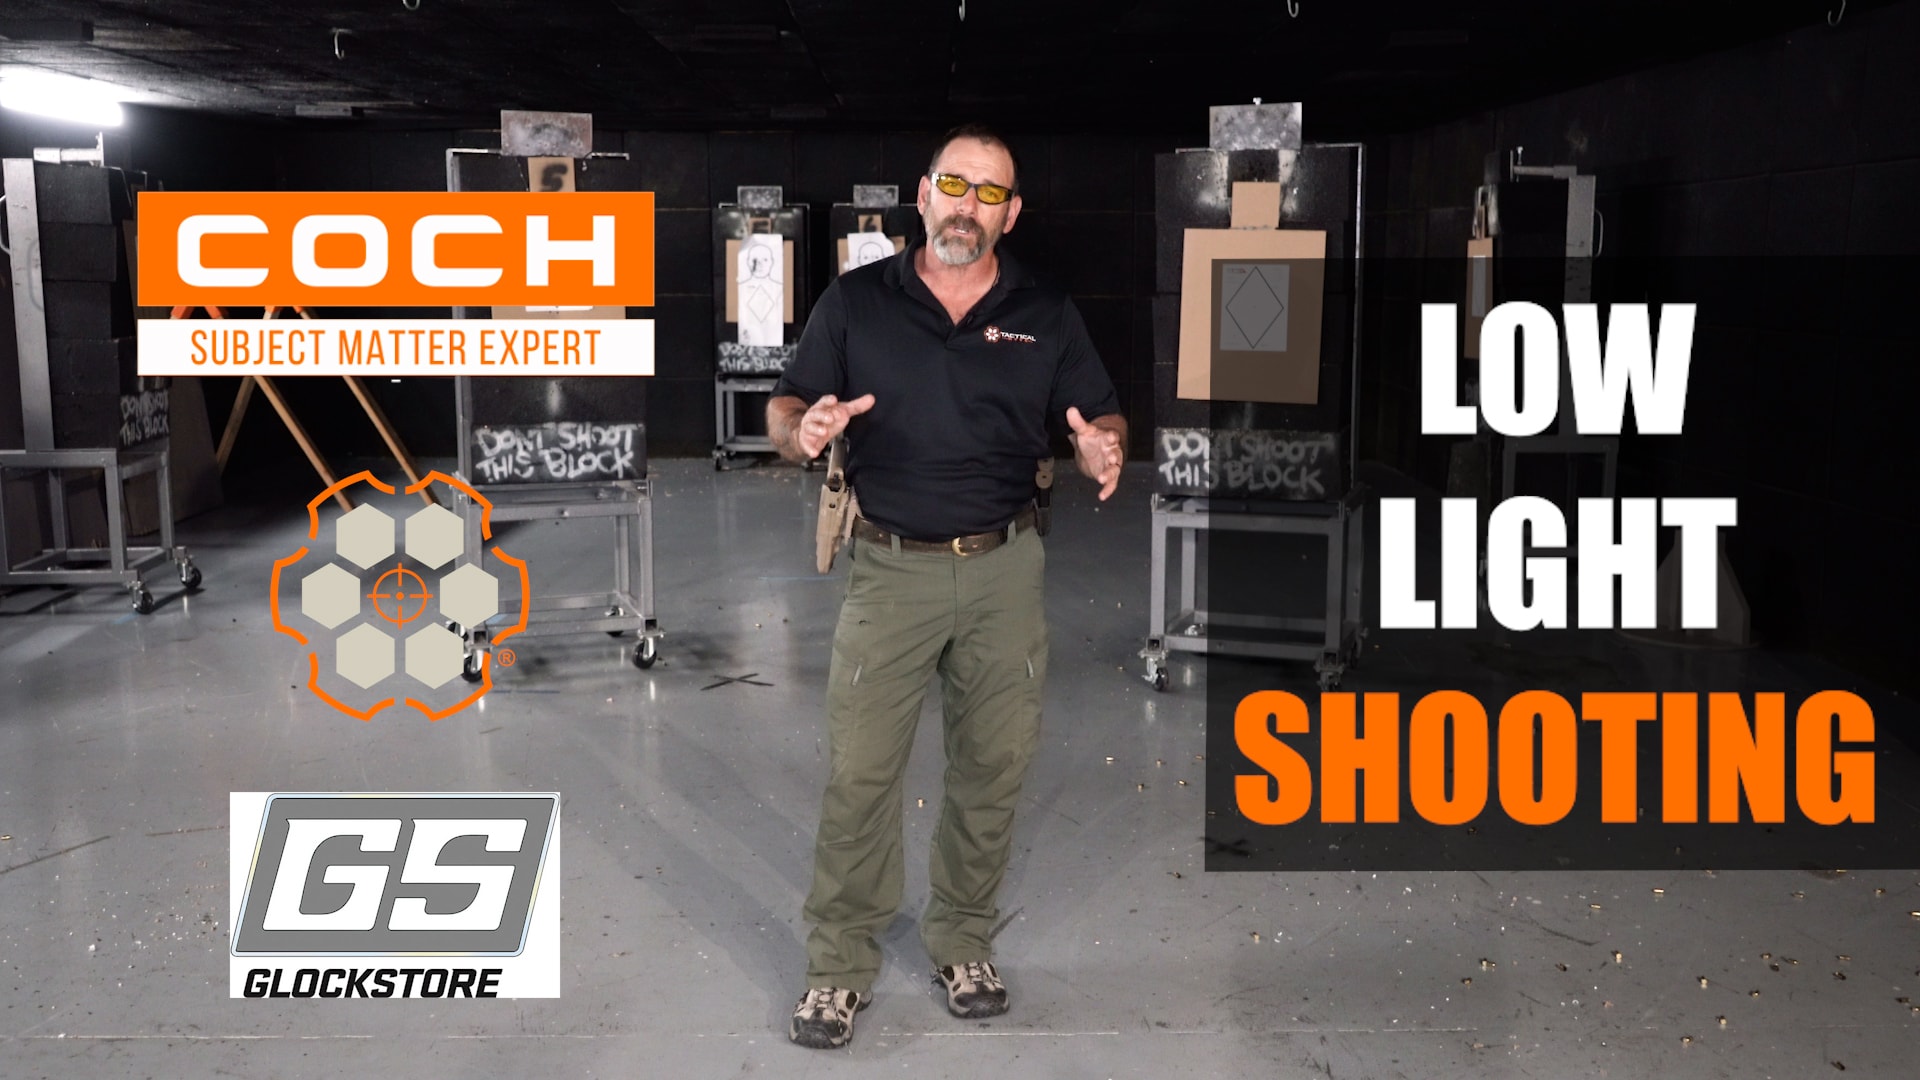 Retired Navy SEAL Coch demonstrates low light shooting.